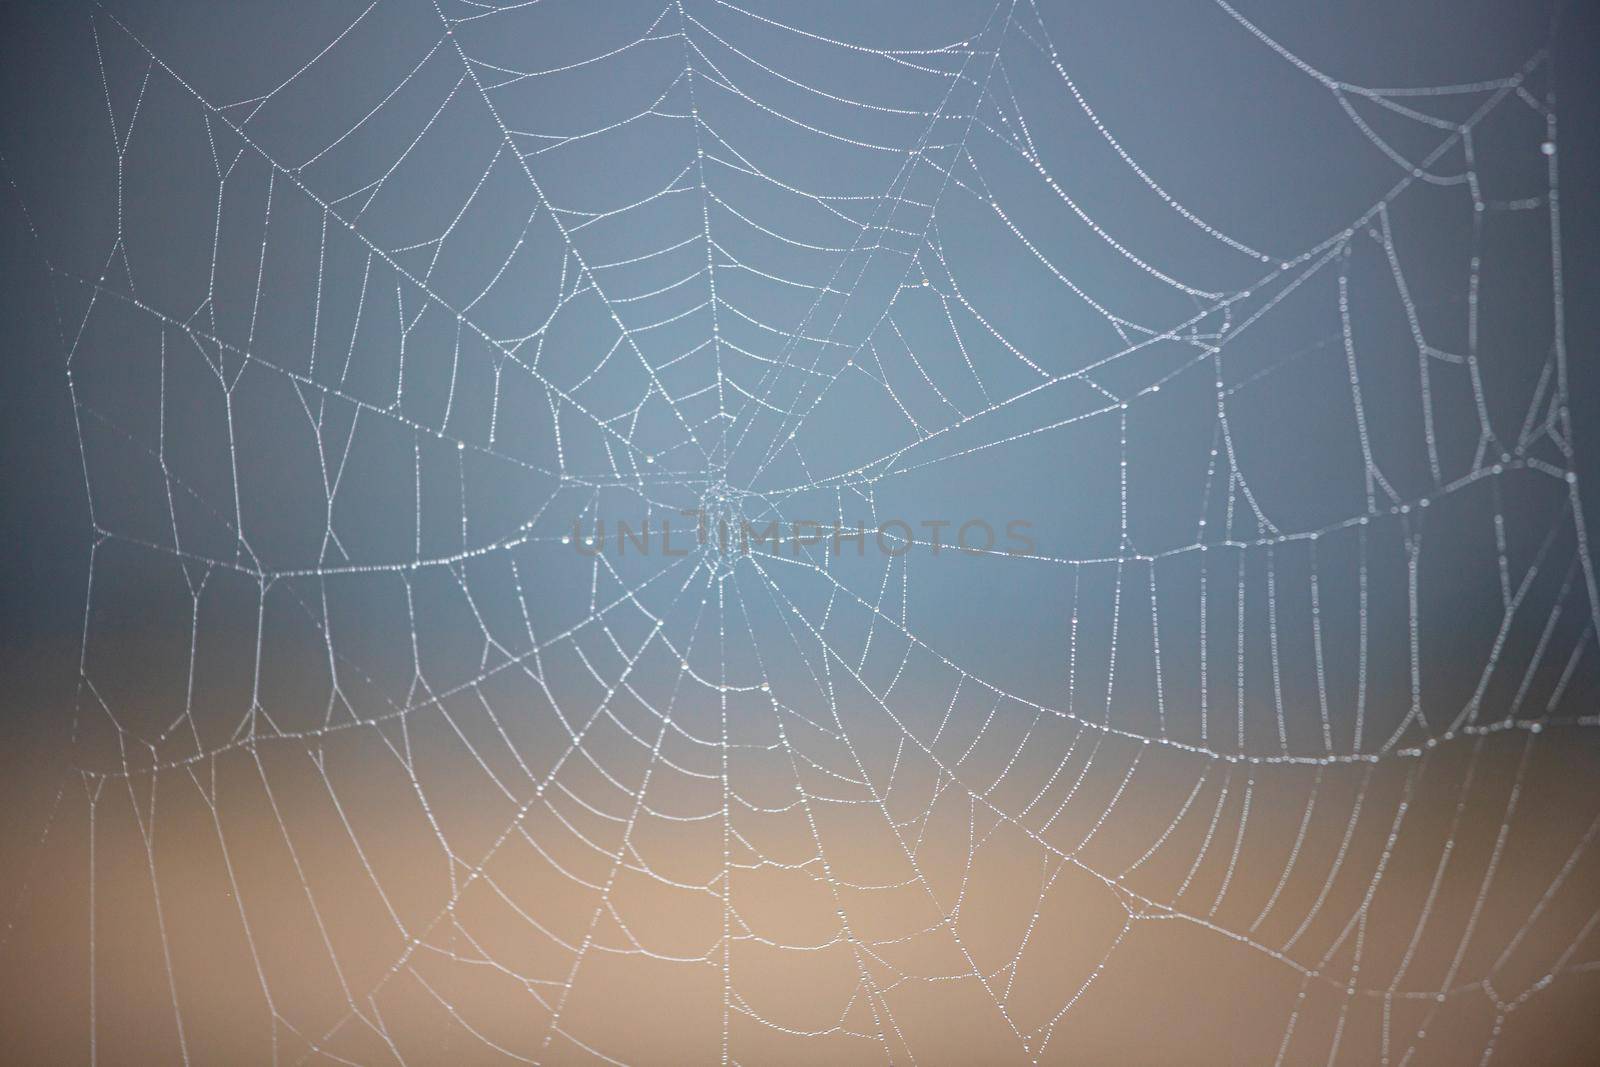 Web design in nature, created by insects on a nice blurry background. The selected focus.